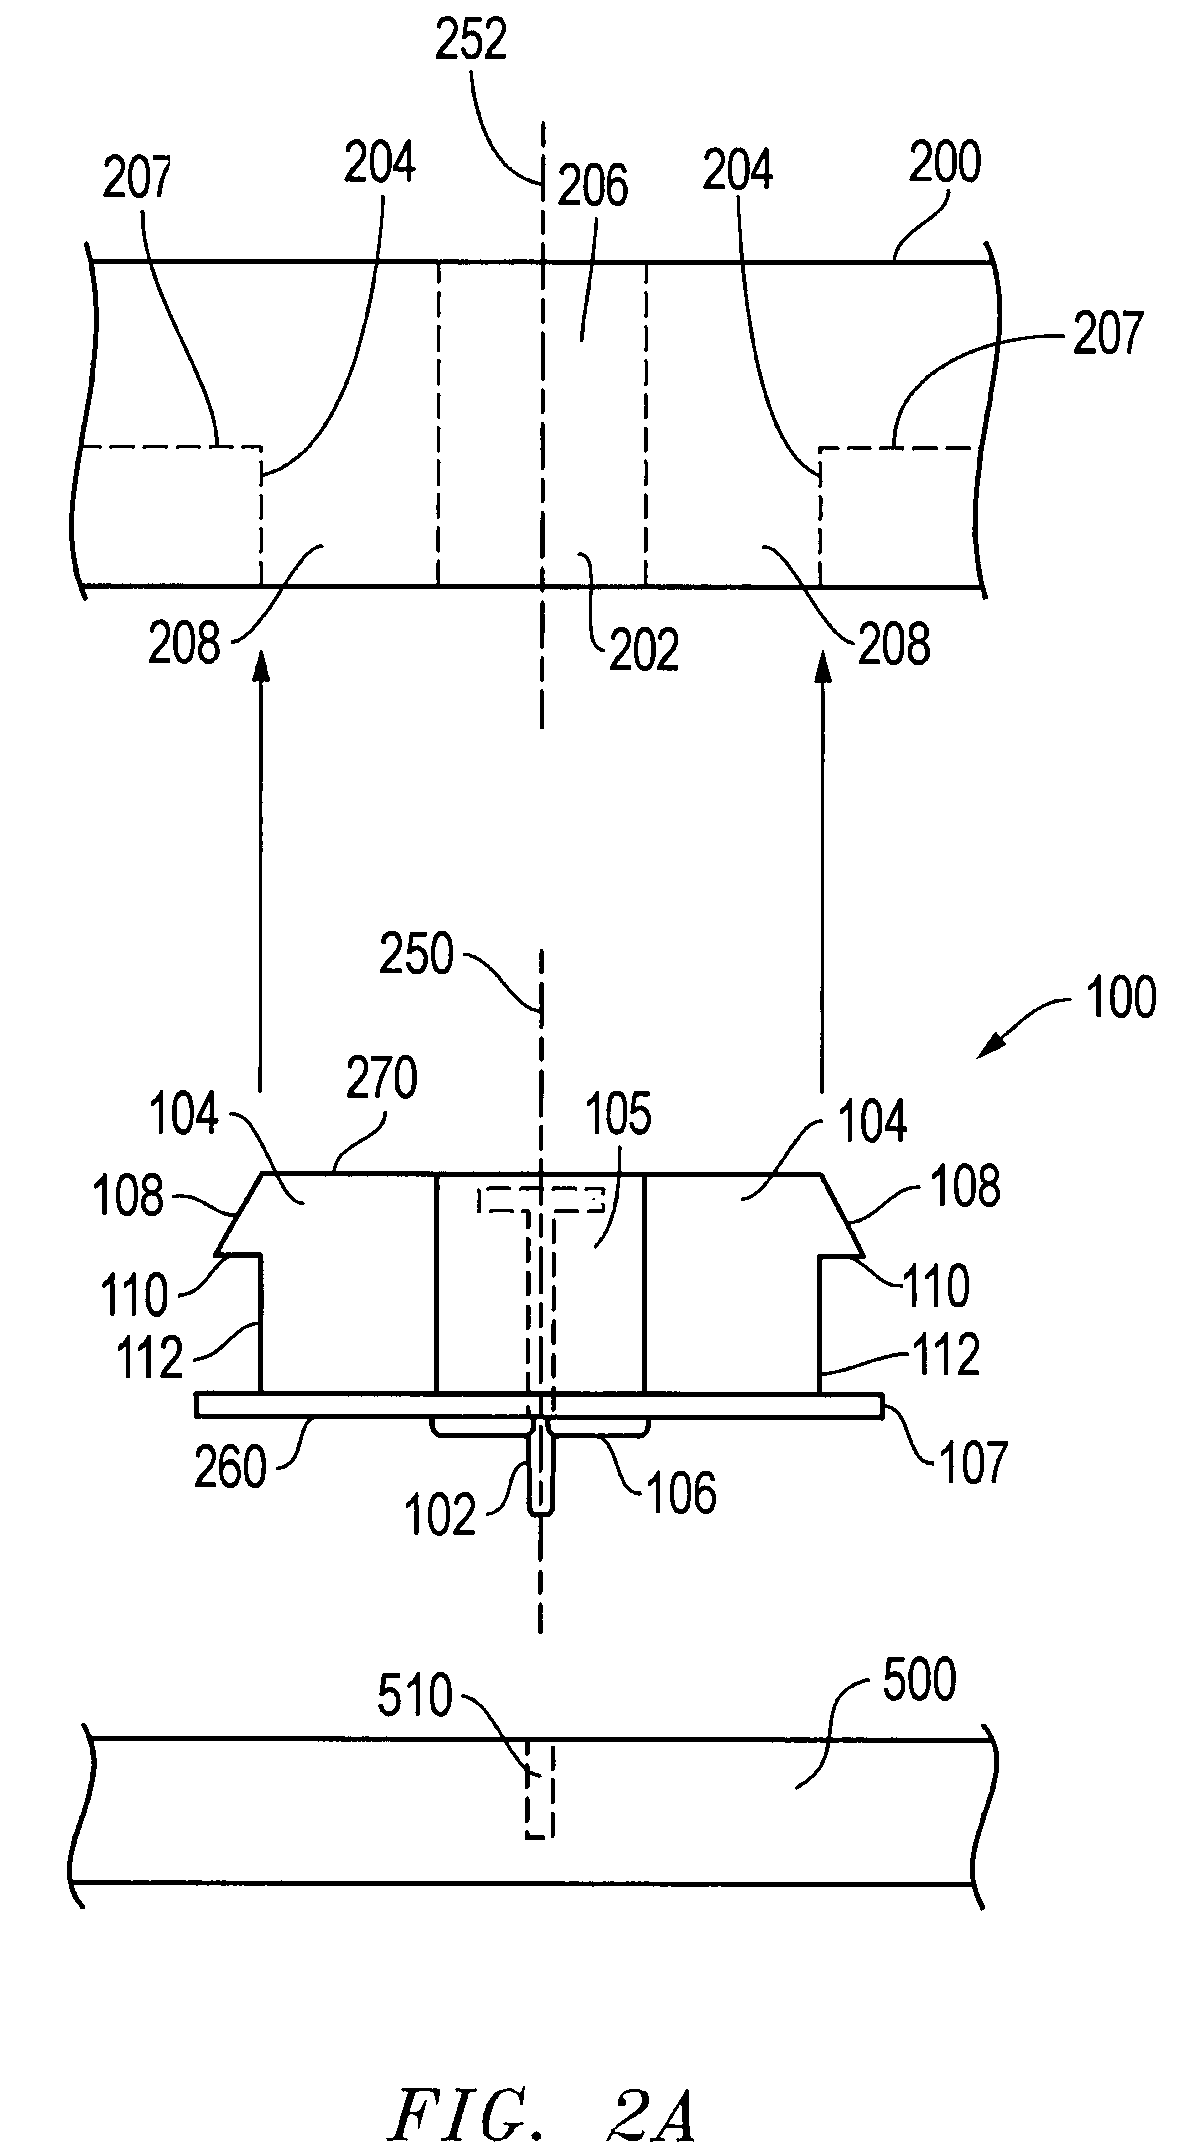 Systems and methods for mounting components of an information handling system